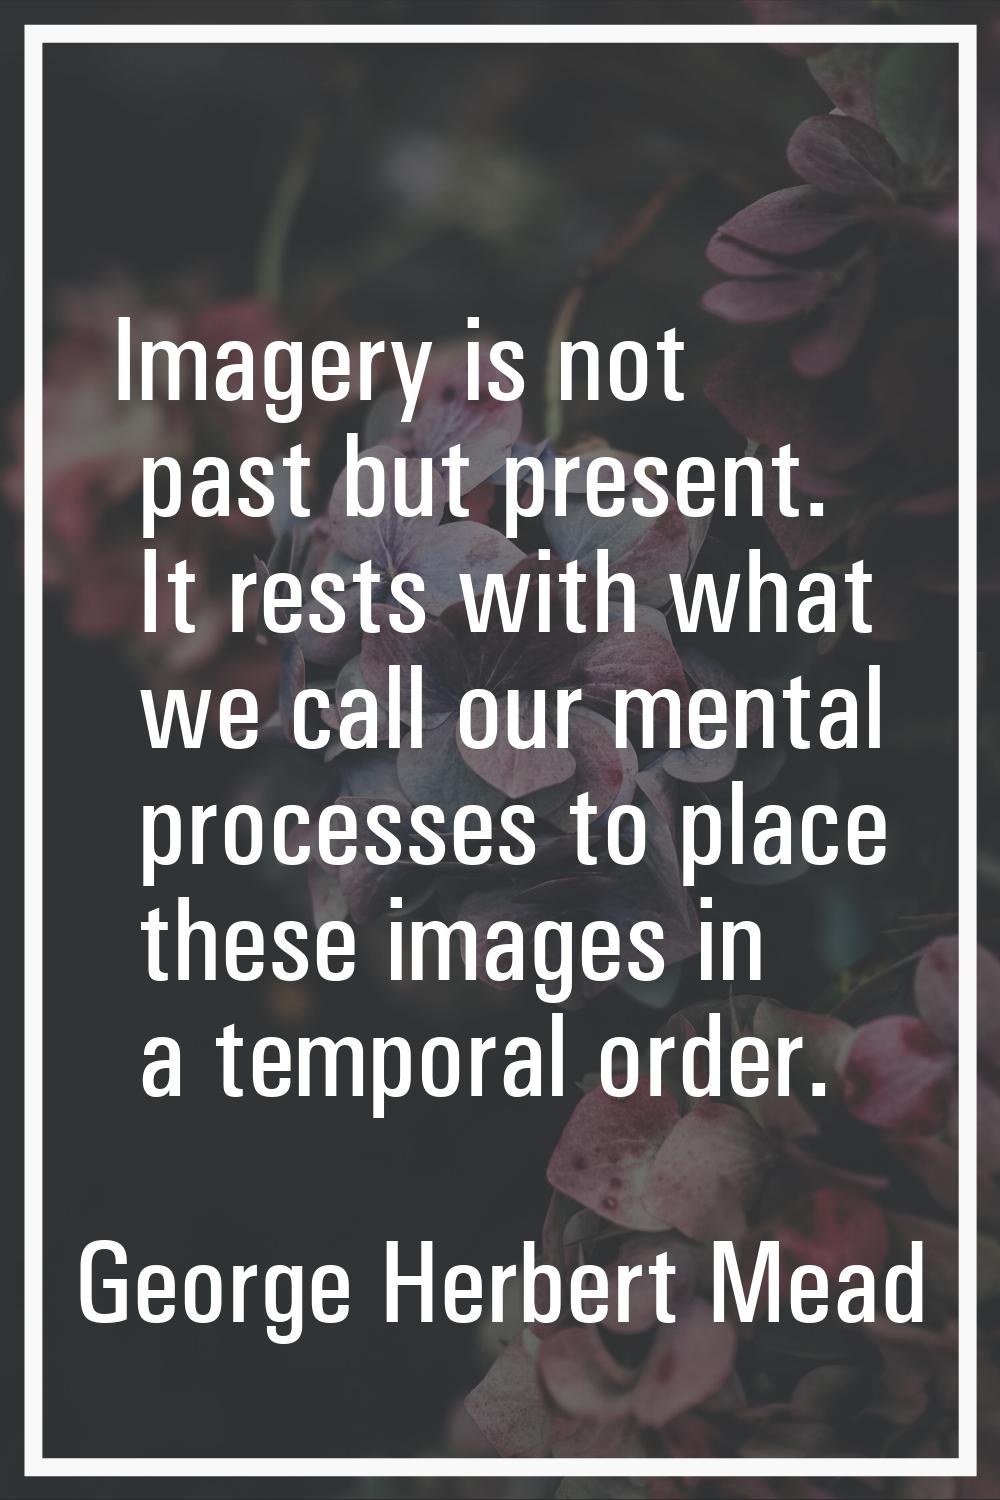 Imagery is not past but present. It rests with what we call our mental processes to place these ima